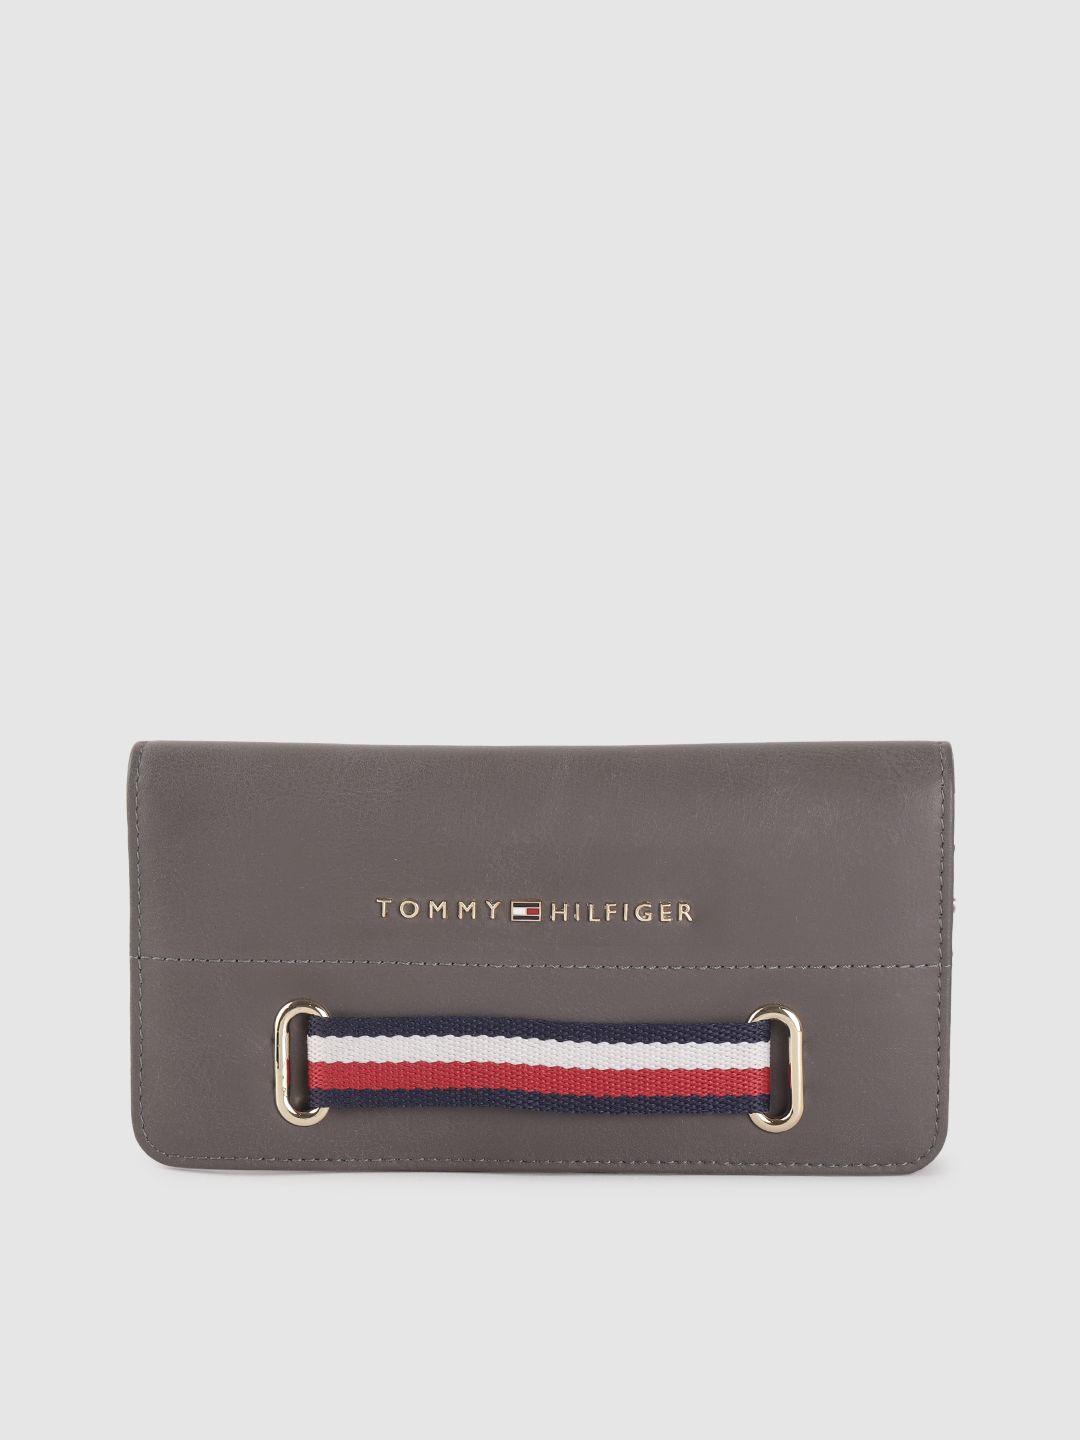 Tommy Hilfiger Women Grey Leather Two Fold Wallet Price in India